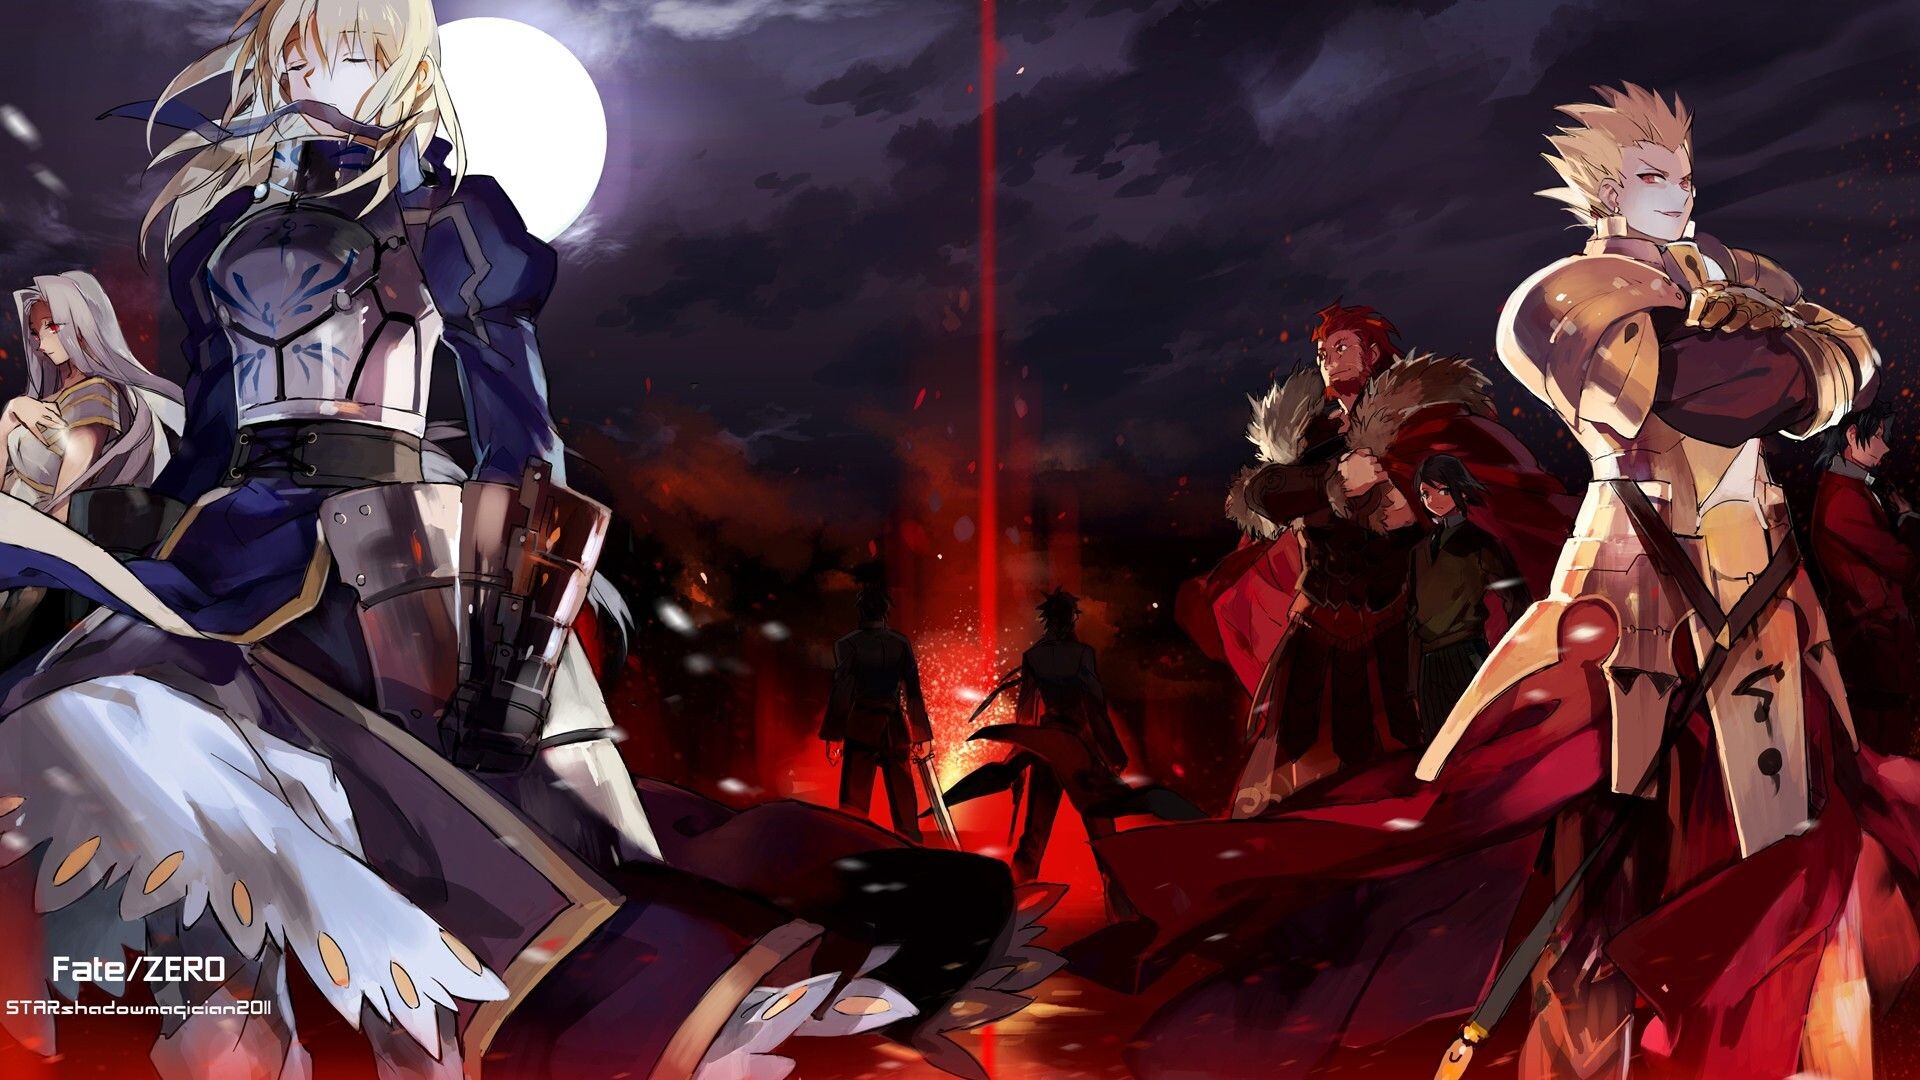 Gilgamesh (Fate/Zero): Fate/stay night, Developed by Type-Moon, Originally released as an adult game for Windows on January 30, 2004. 1920x1080 Full HD Wallpaper.